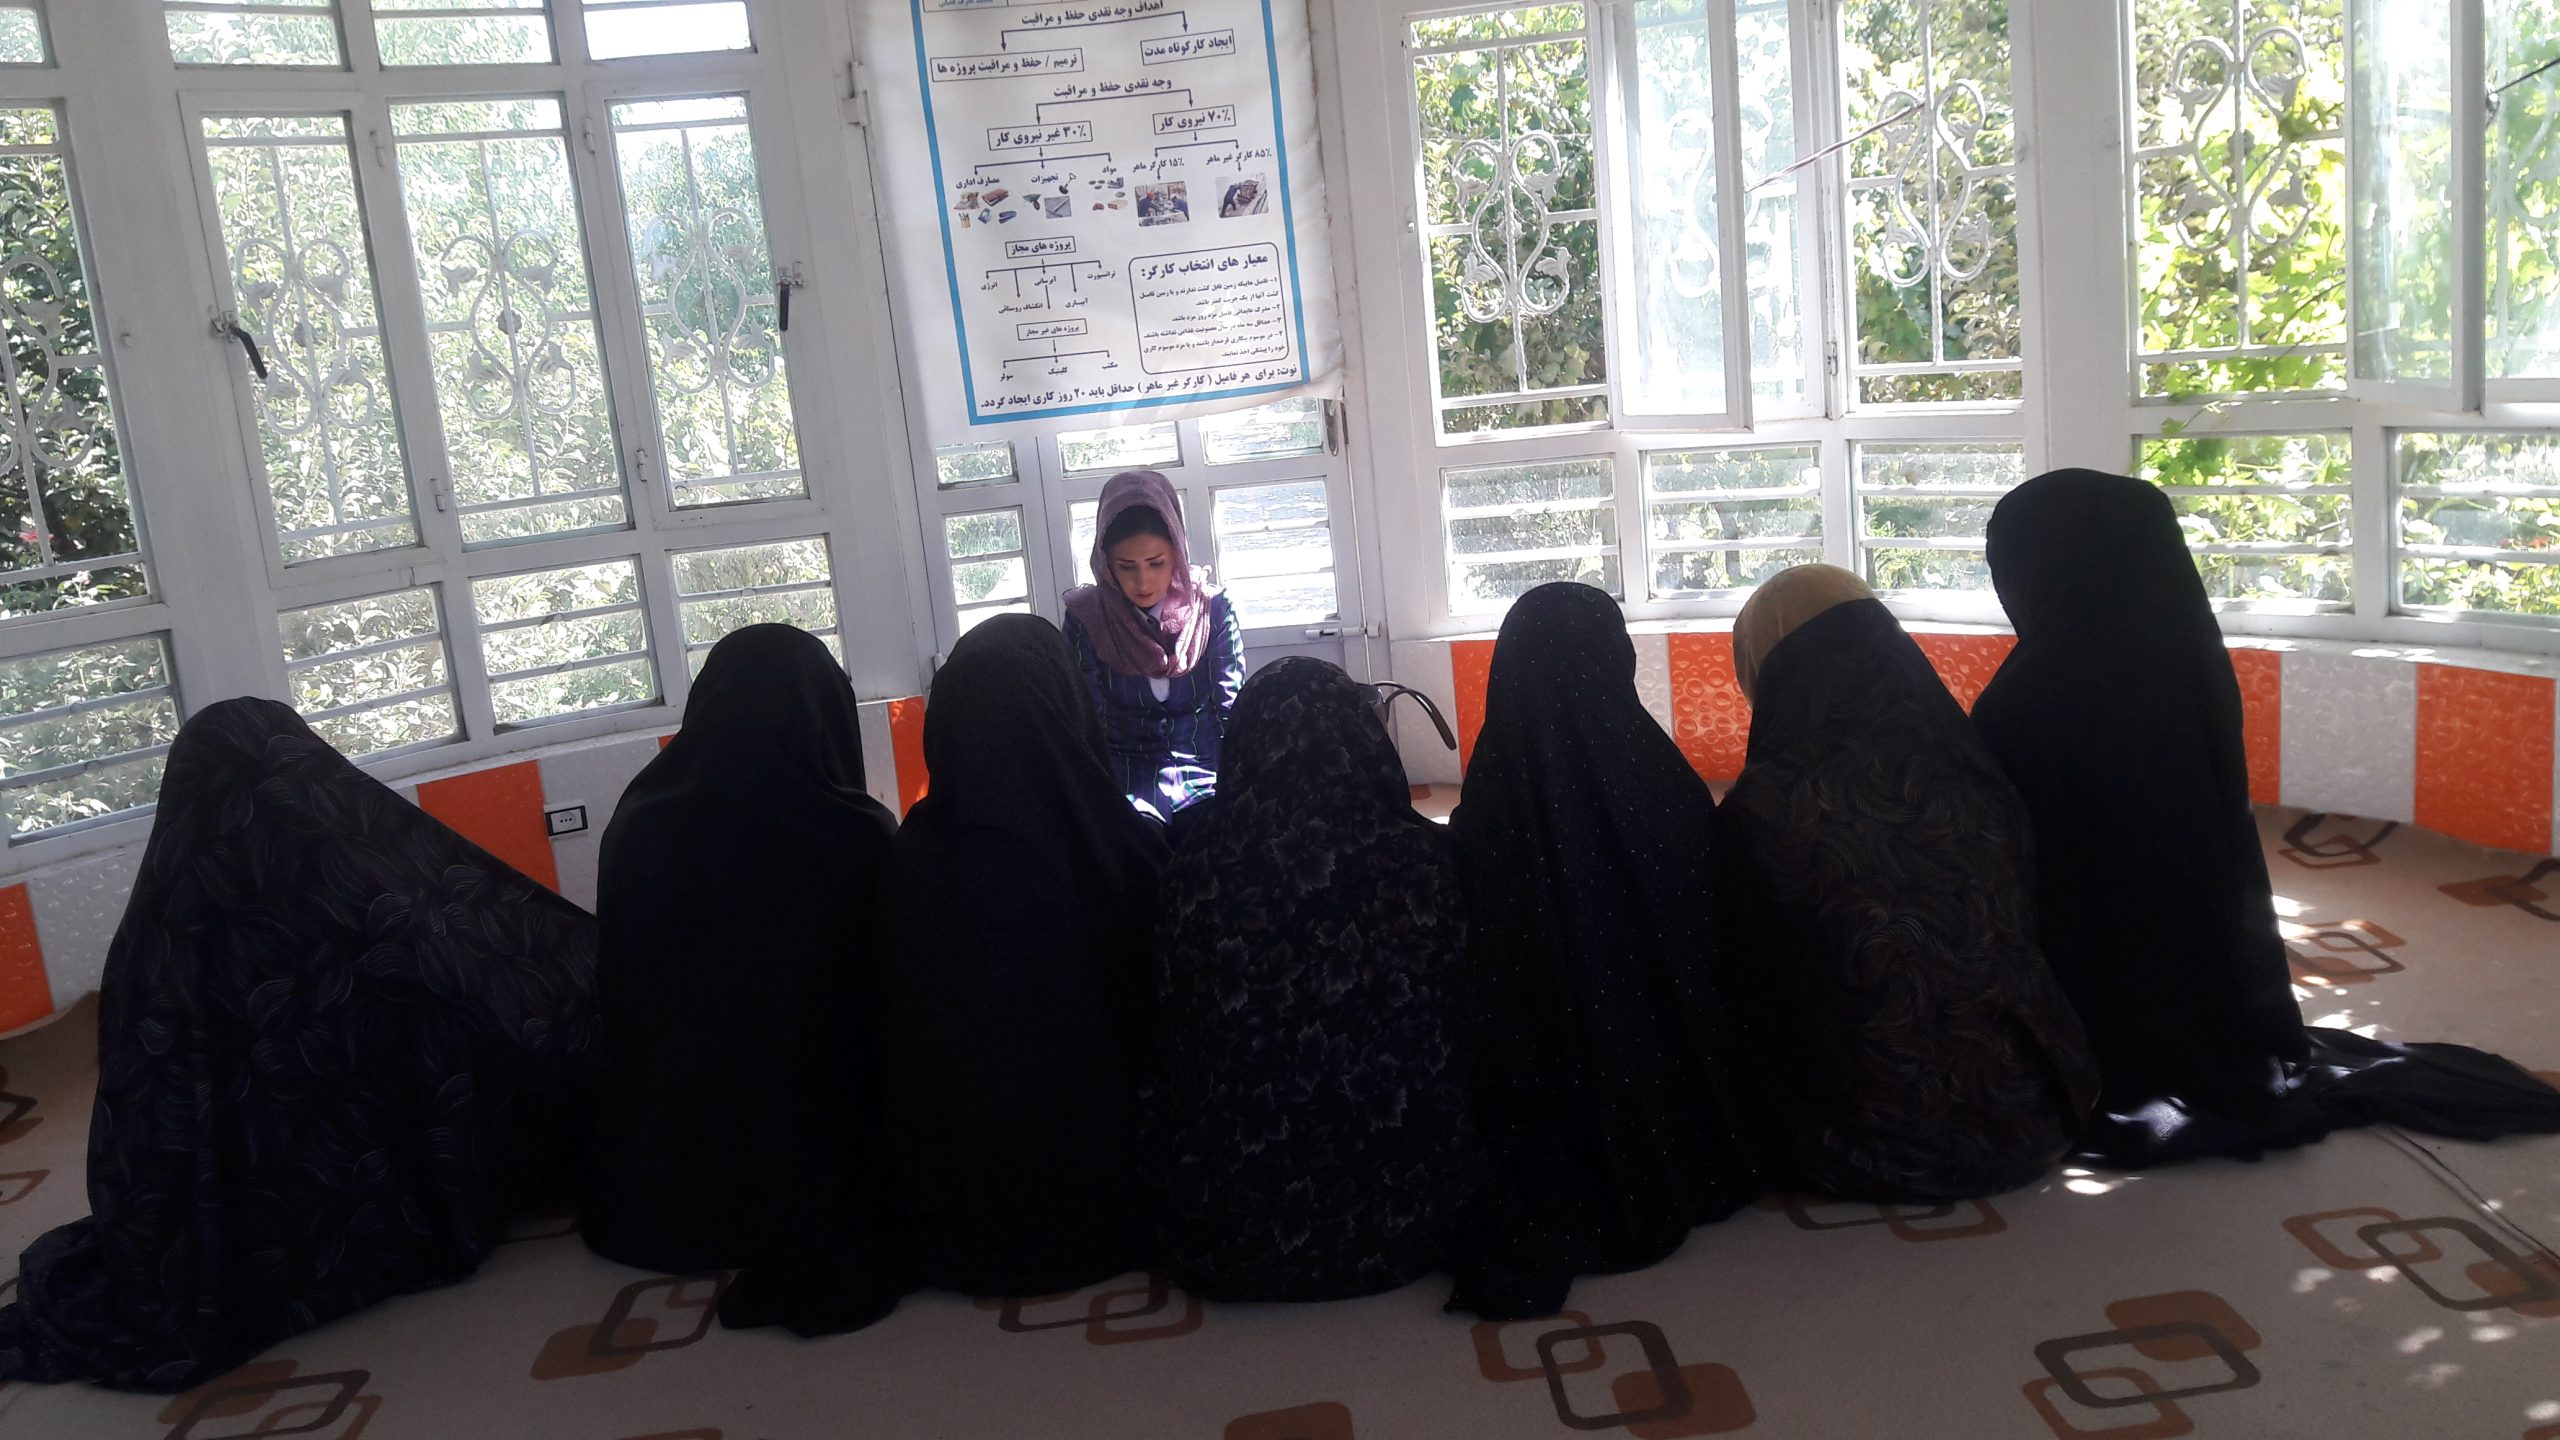 Fatima Roshanian, centre, speak with a group of women in the Herat province in Afghanistan